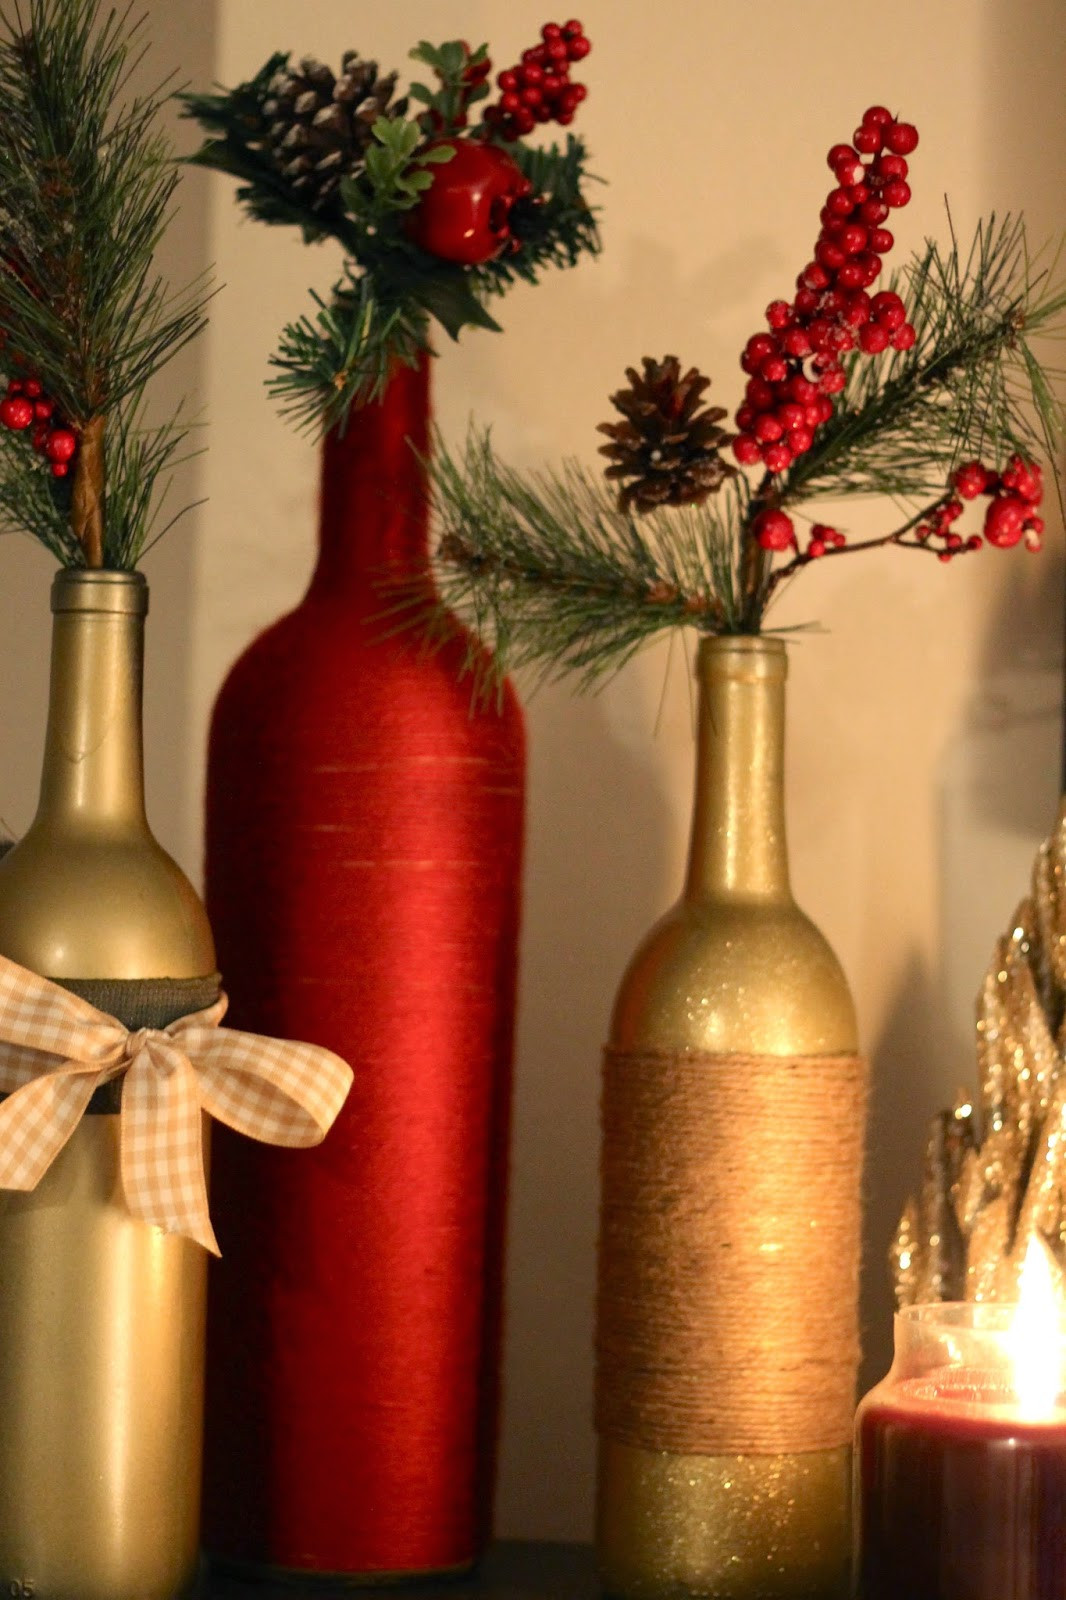 DIY Wine Bottle Decorating Ideas
 DIY Holiday Wine Bottles Pretty in the Pines North